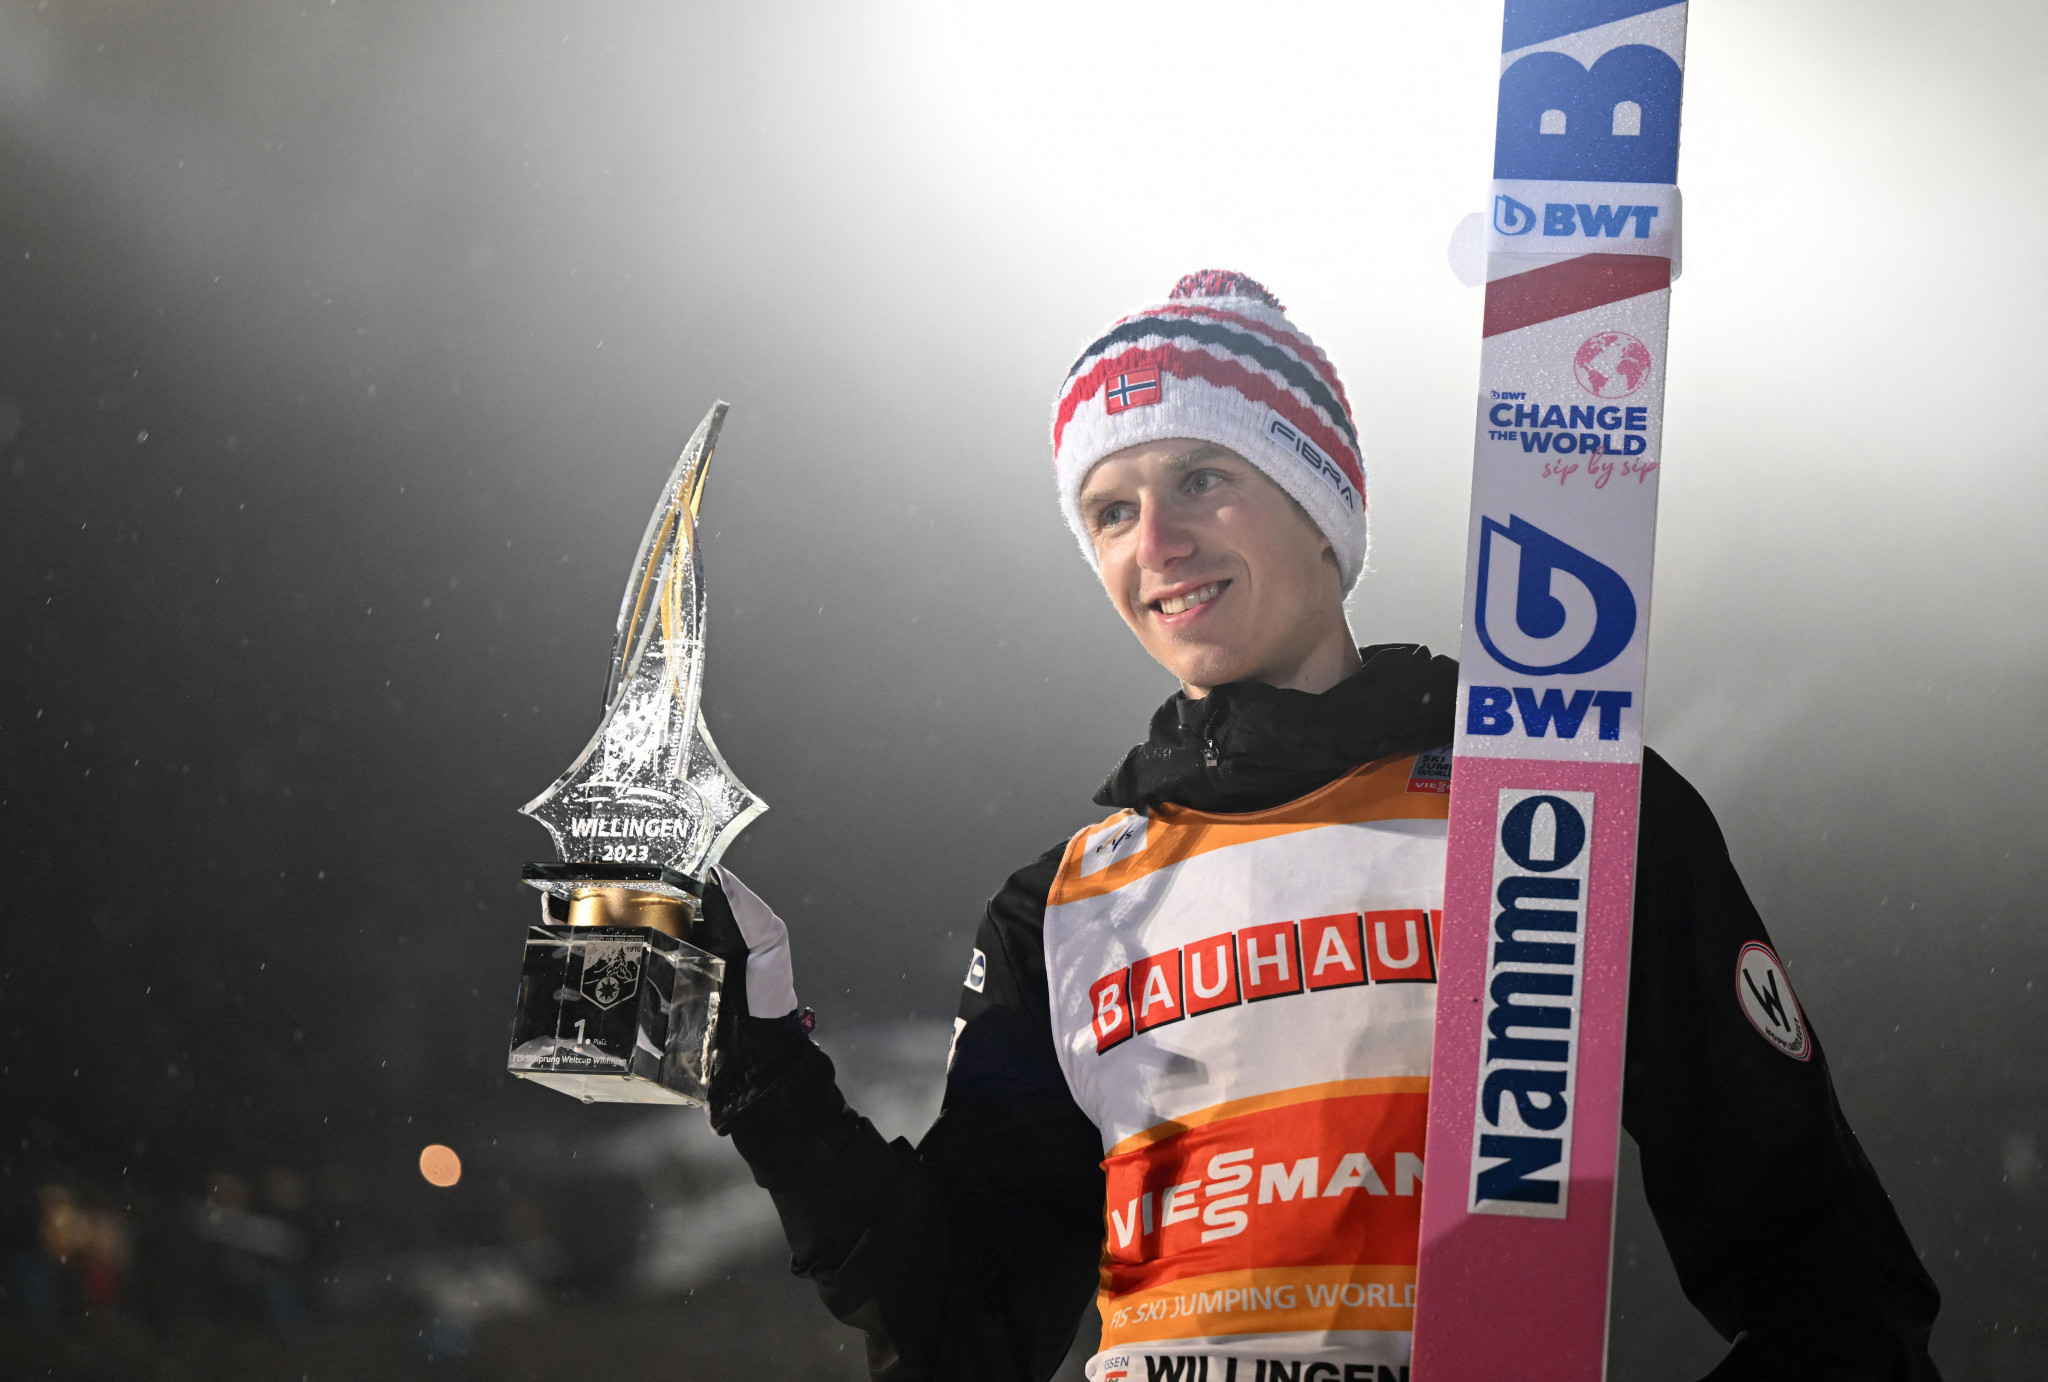 Norway's Halvor Egner Granerud earned a fourth consecutive men's Ski Jumping World Cup win ©Getty Images